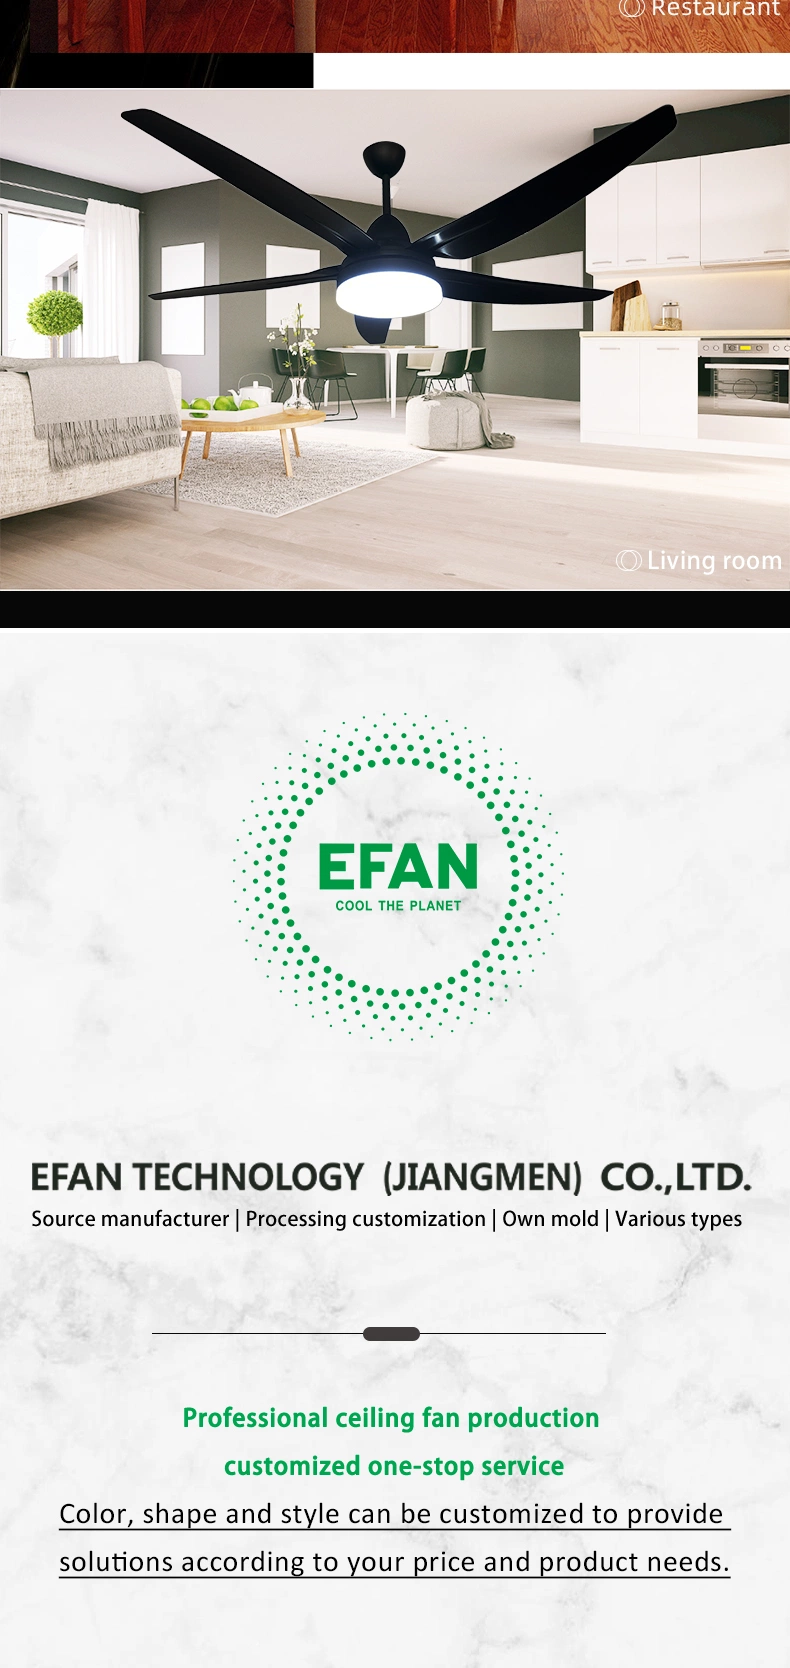 Efan a Series Manufacturer of 56inch Industrial Ceiling Fans with Lights